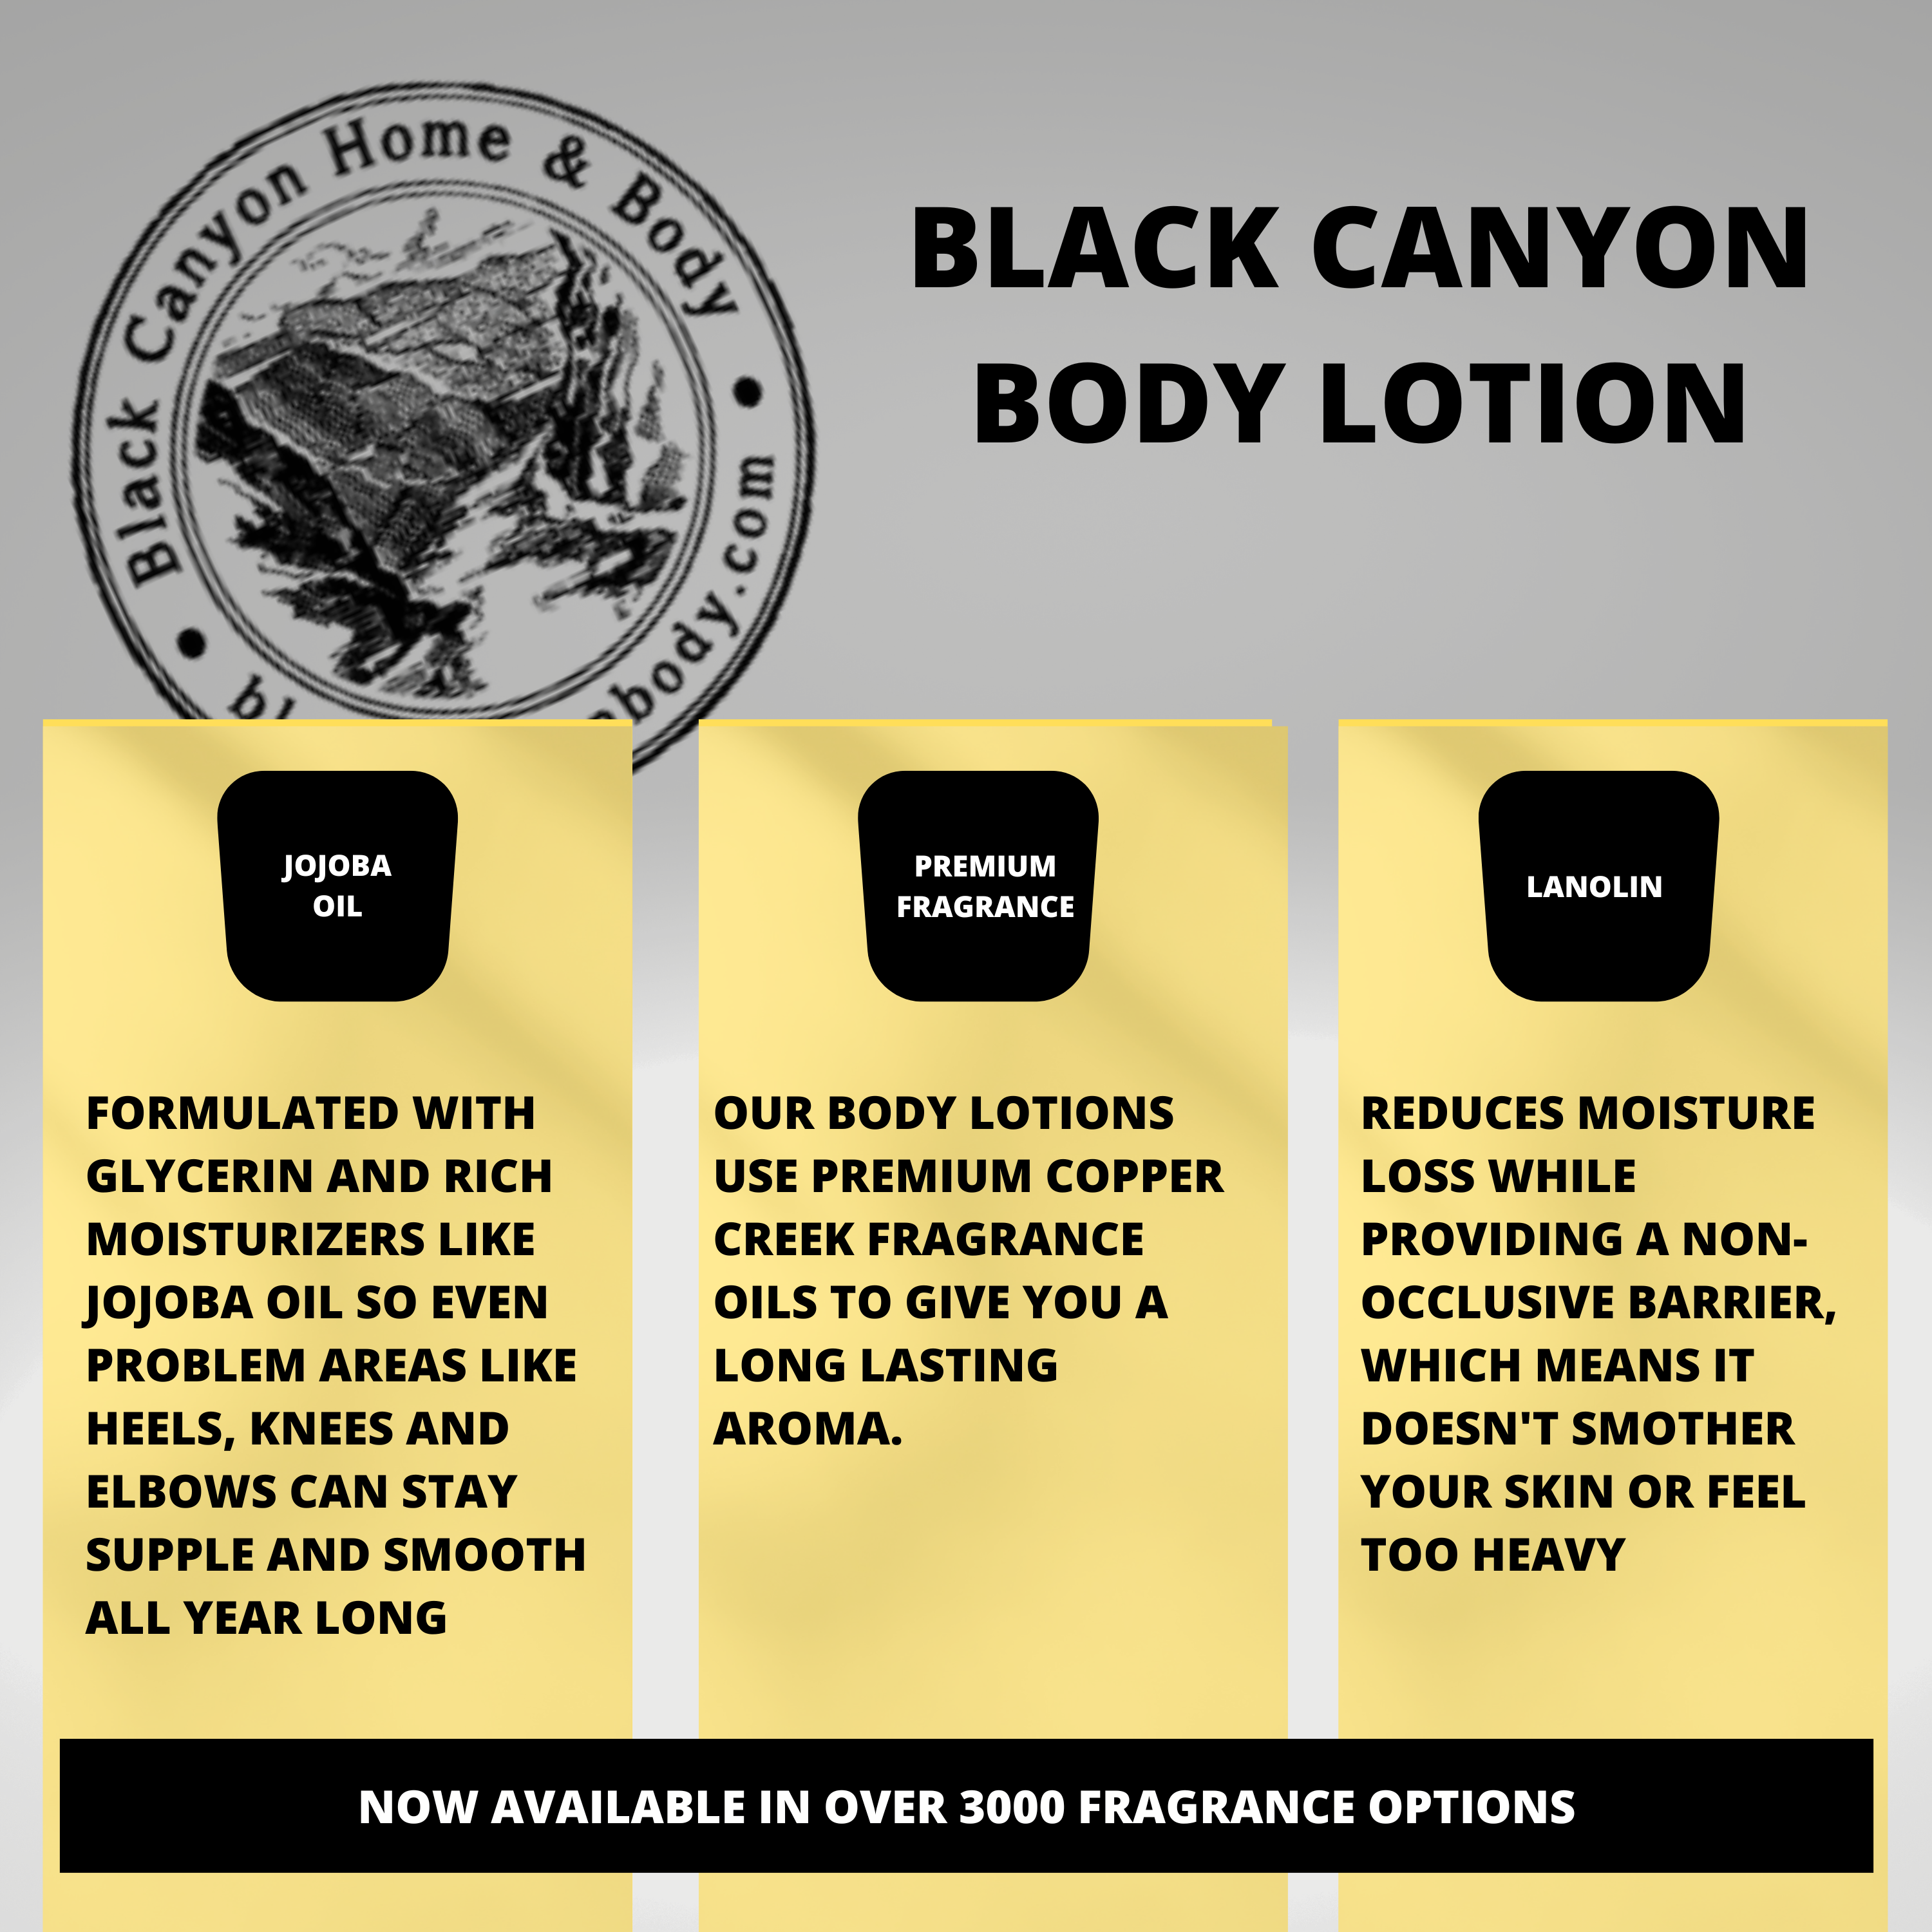 Black Canyon Poinsettia Scented Luxury Body Lotion with Lanolin and Jojoba Oil